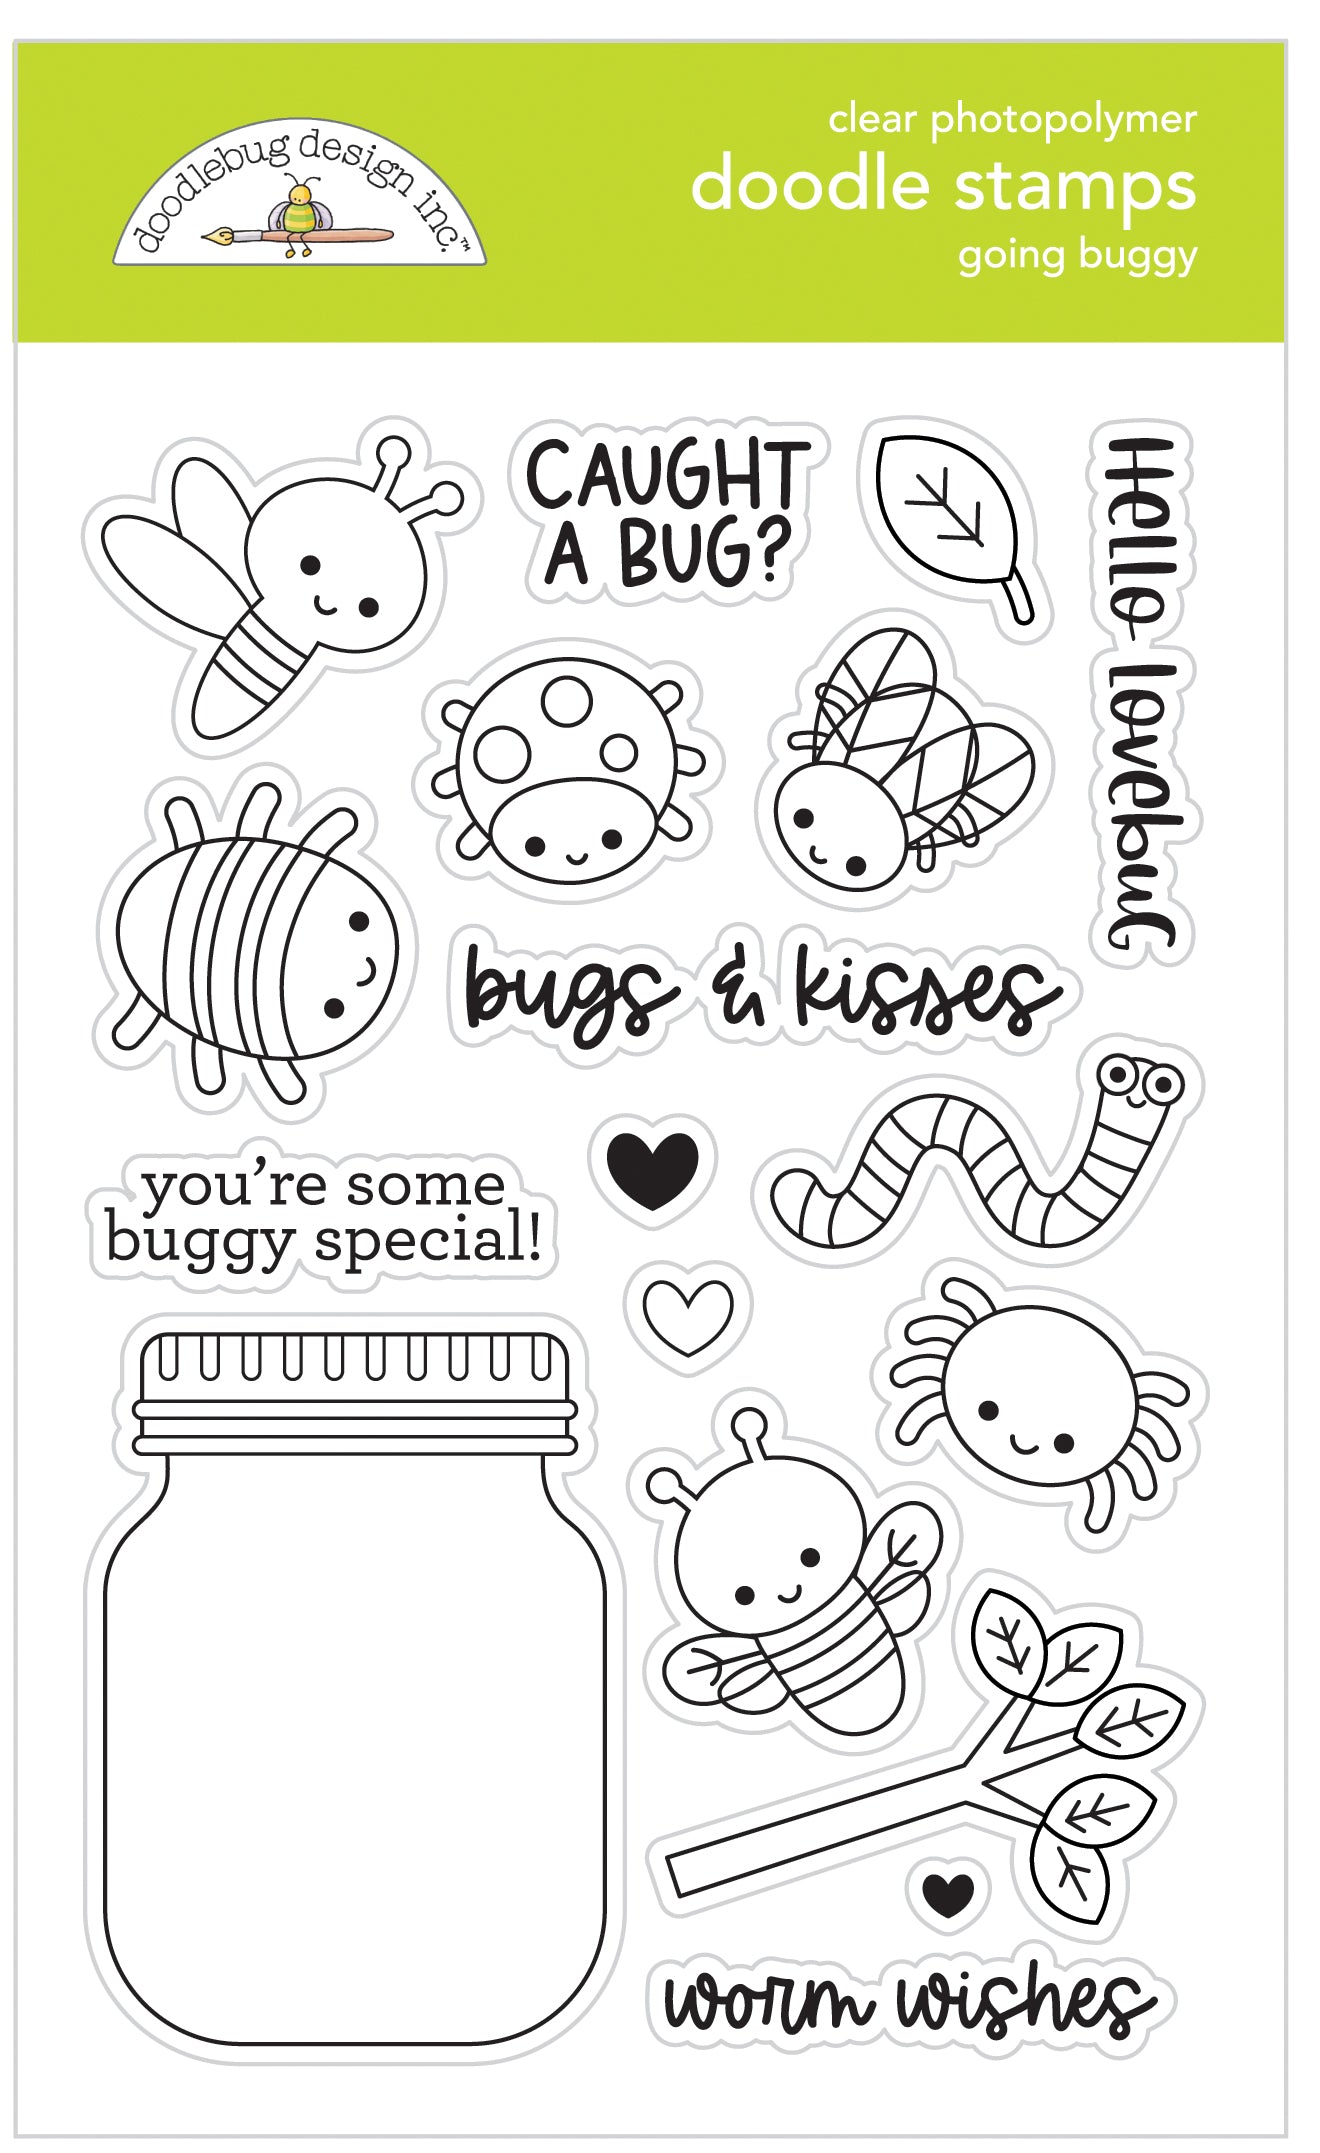 Going Buggy Stamps by Doodlebug Designs